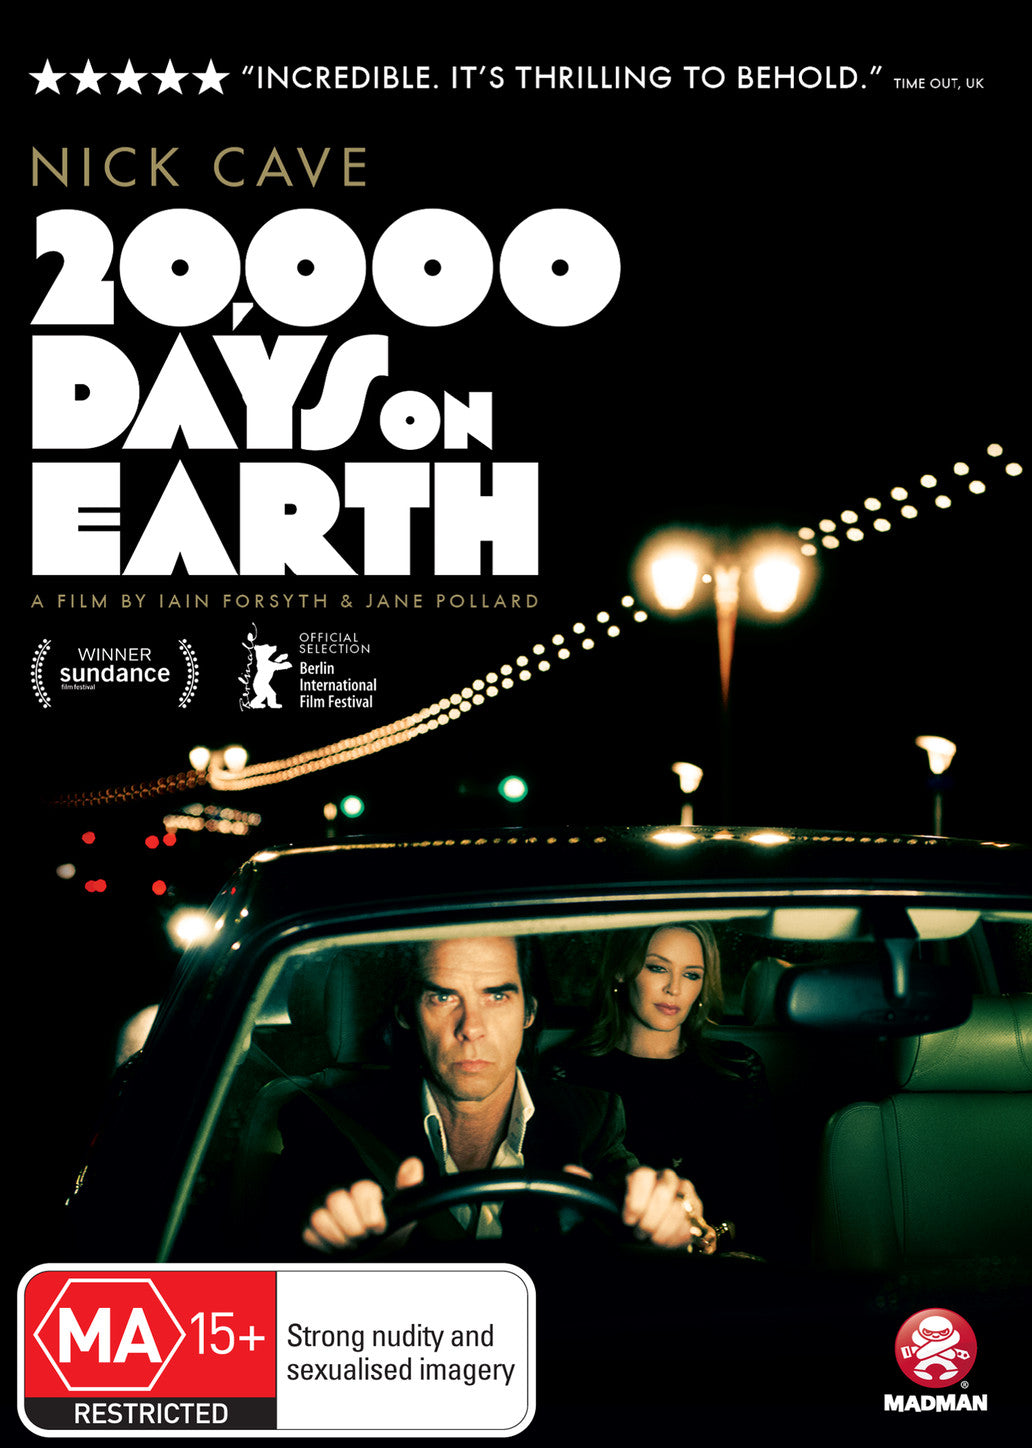 NICK CAVE: 20,000 DAYS ON EARTH